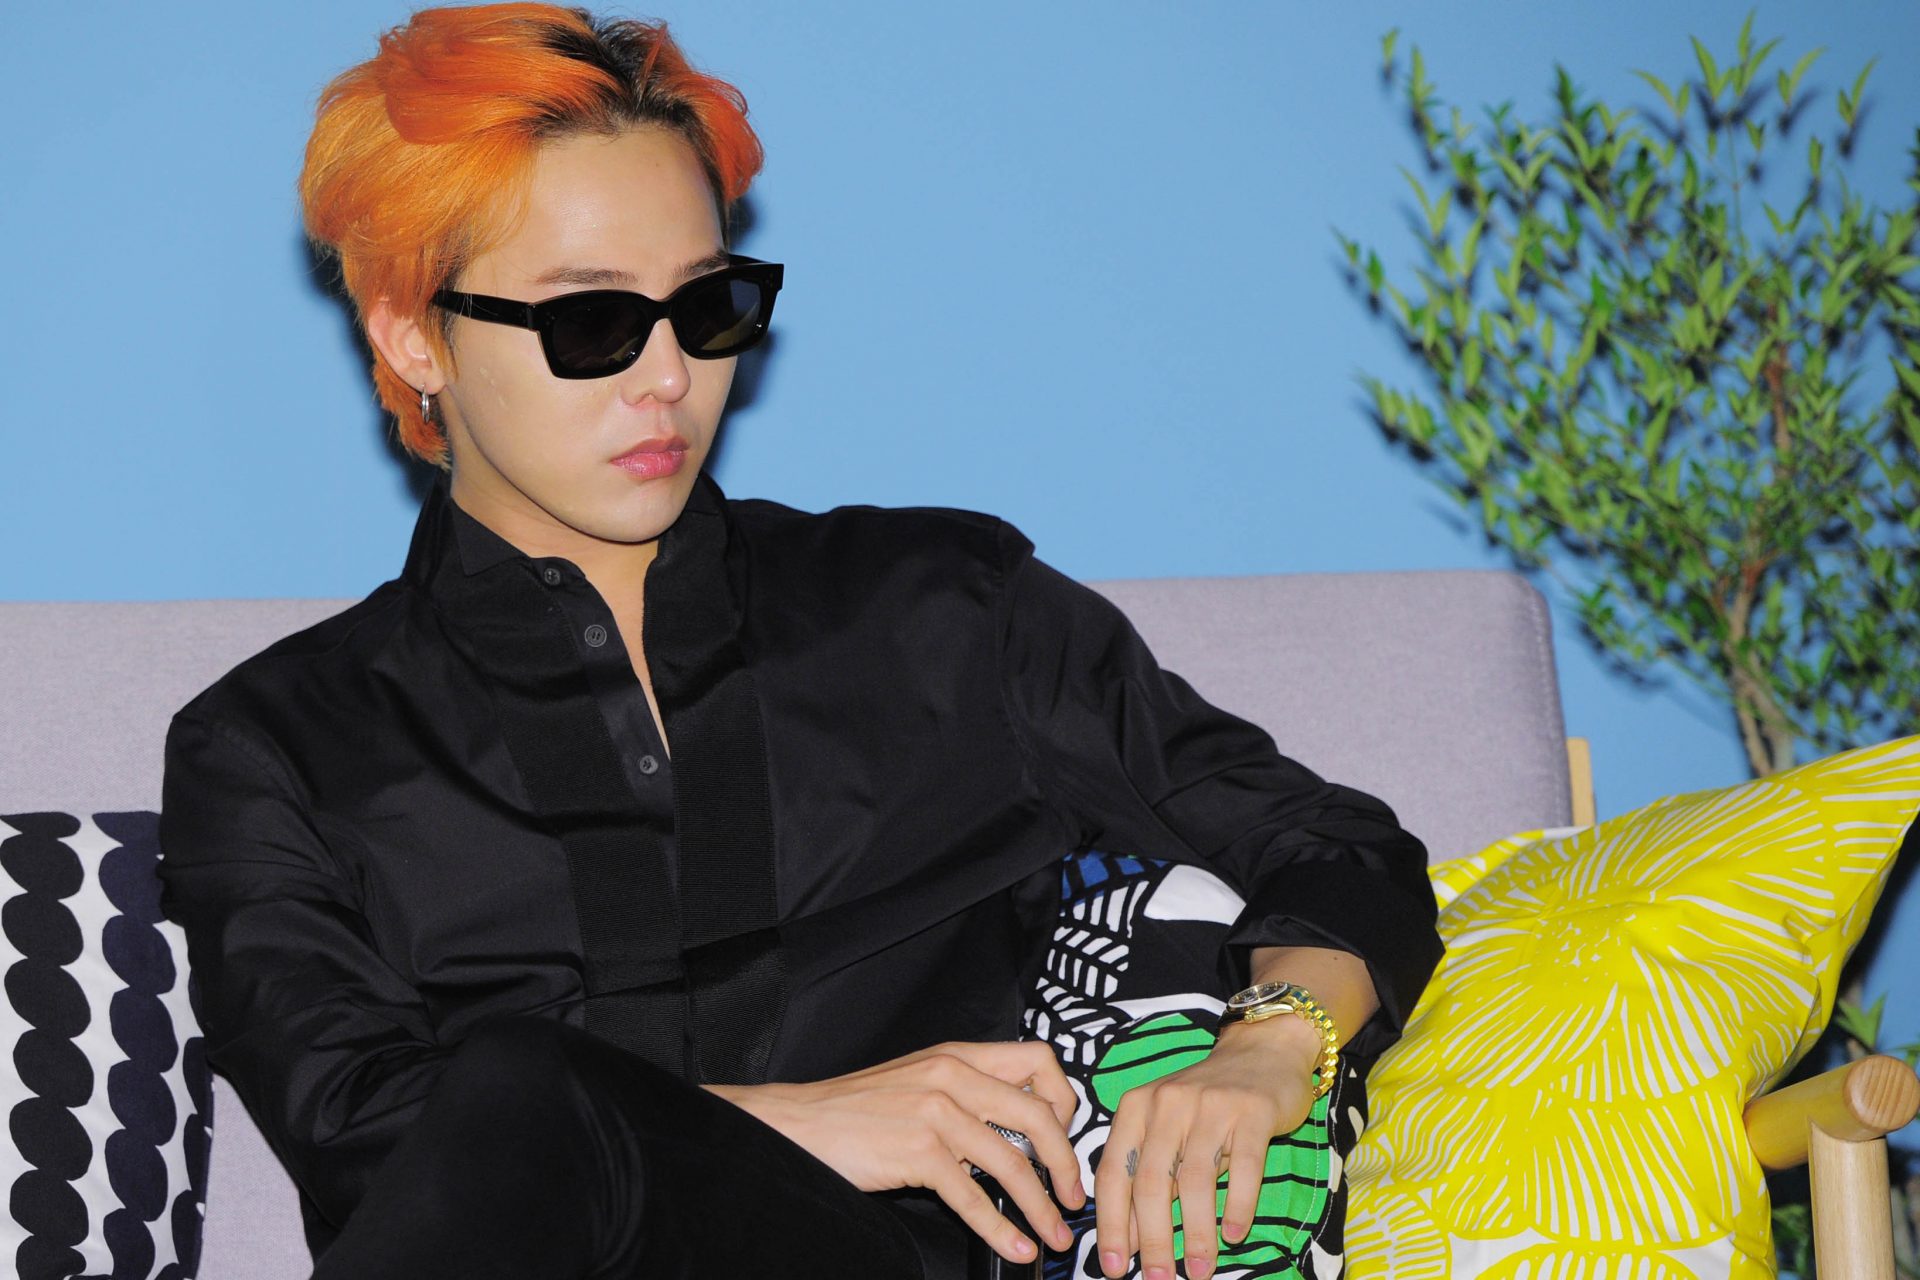 Looking into G-Dragon